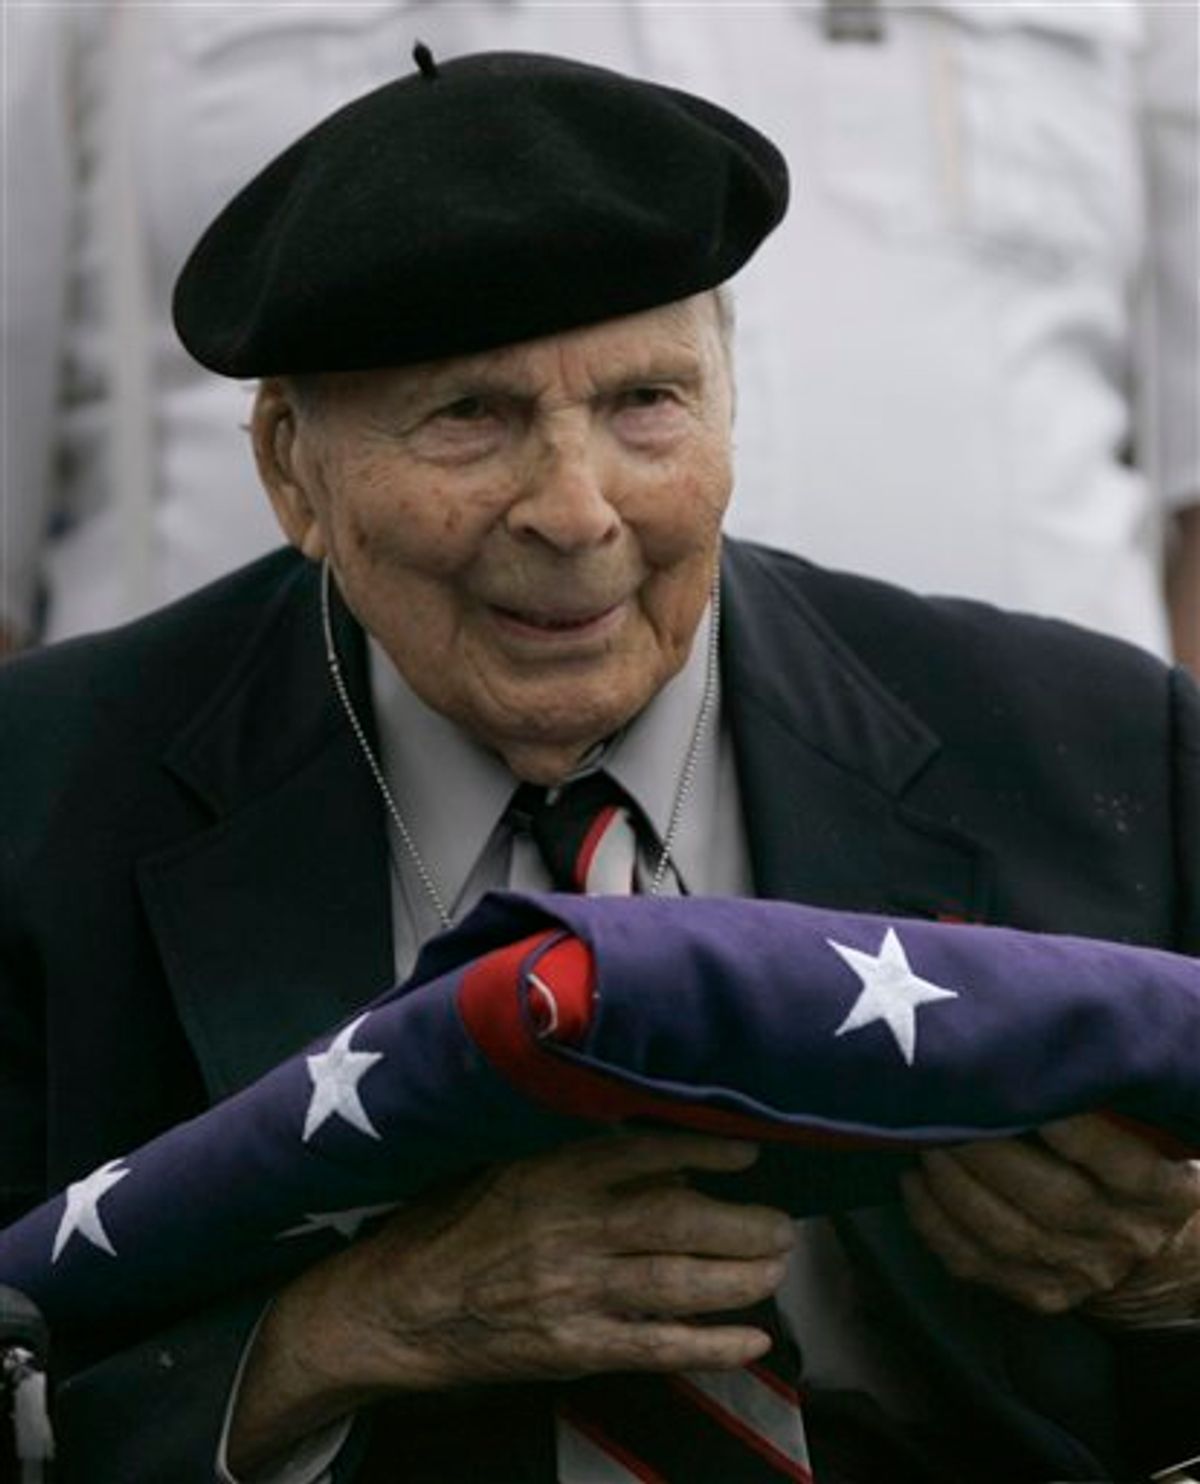 FILE -- In a May 26, 2008 file photo Frank Buckles receives an American flag during Memorial Day activities at the National World War I Museum in Kansas City, Mo. Biographer and family spokesman David DeJonge said in a statement that Frank Woodruff Buckles died early Sunday, Feb. 27, 2011 of natural causes in his home in Charles Town, W.Va.   (AP Photo/Charlie Riedel) (AP)